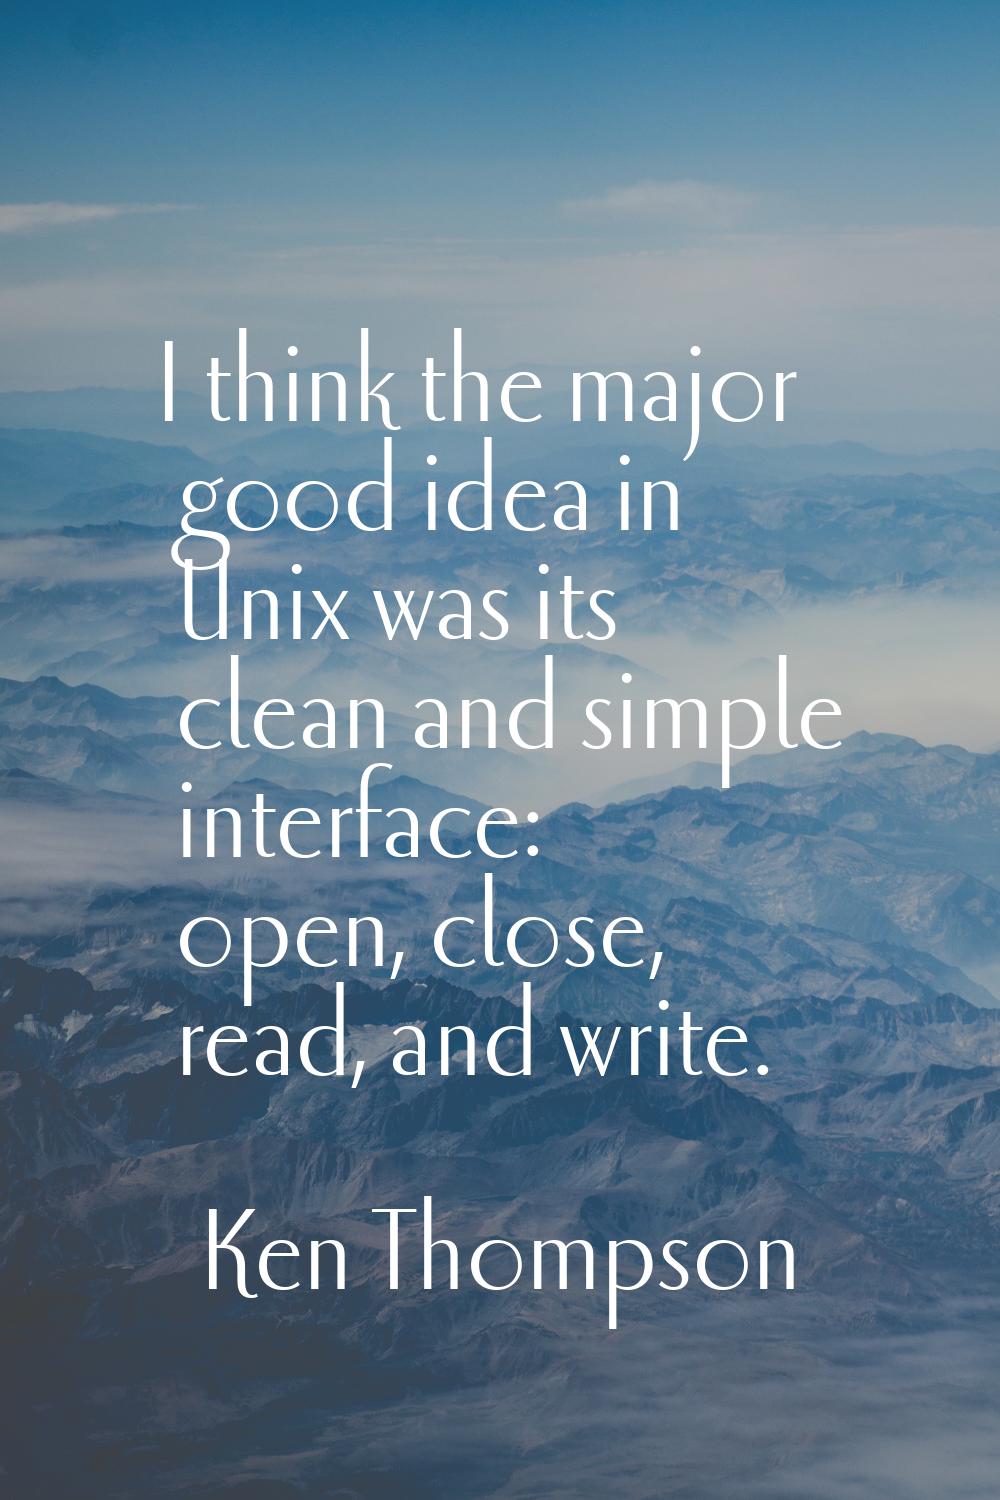 I think the major good idea in Unix was its clean and simple interface: open, close, read, and writ